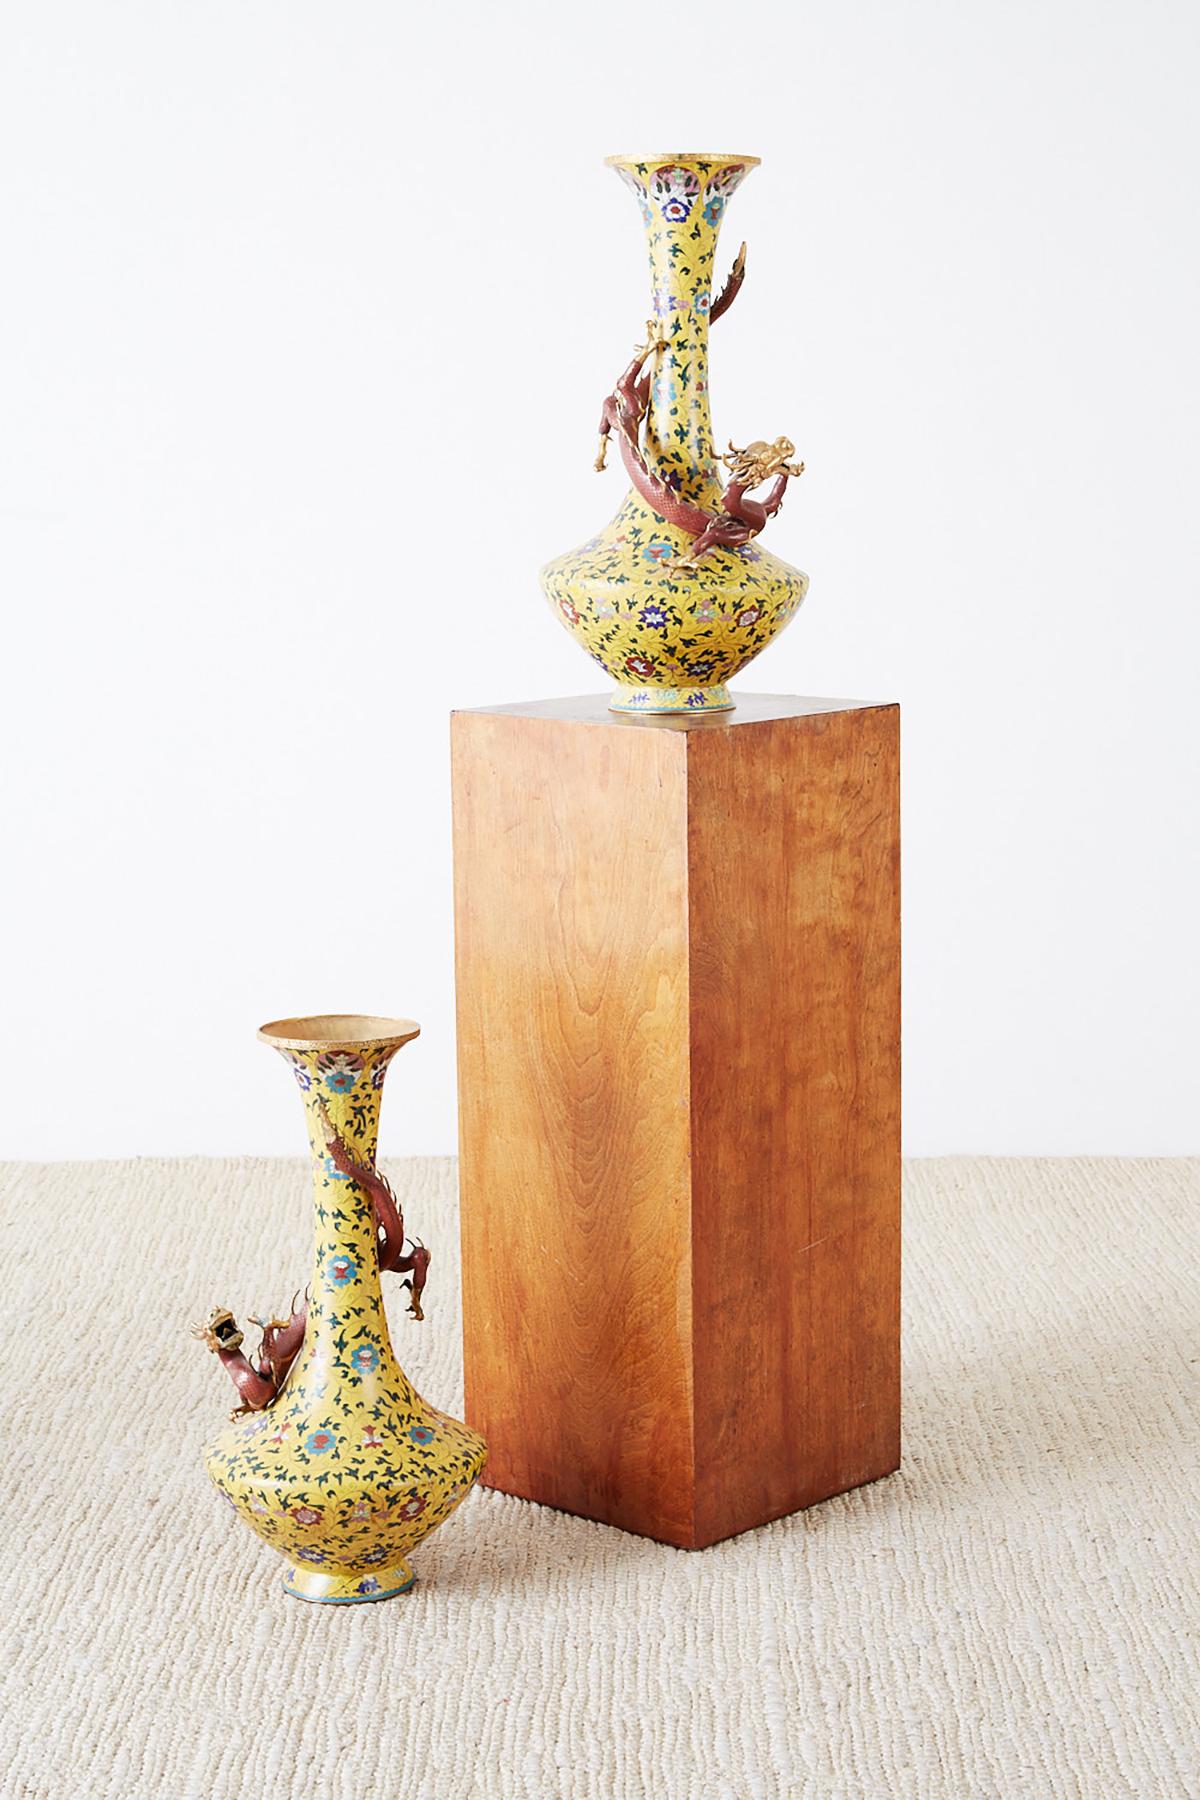 Fantastic pair of early 20th century cloisonné vases featuring mounted Chilong dragons encircling the necks. Colorful imperial yellow ground decorated with intricate floral vine patterns and gilt accents. Beautifully formed vases each having a gilt